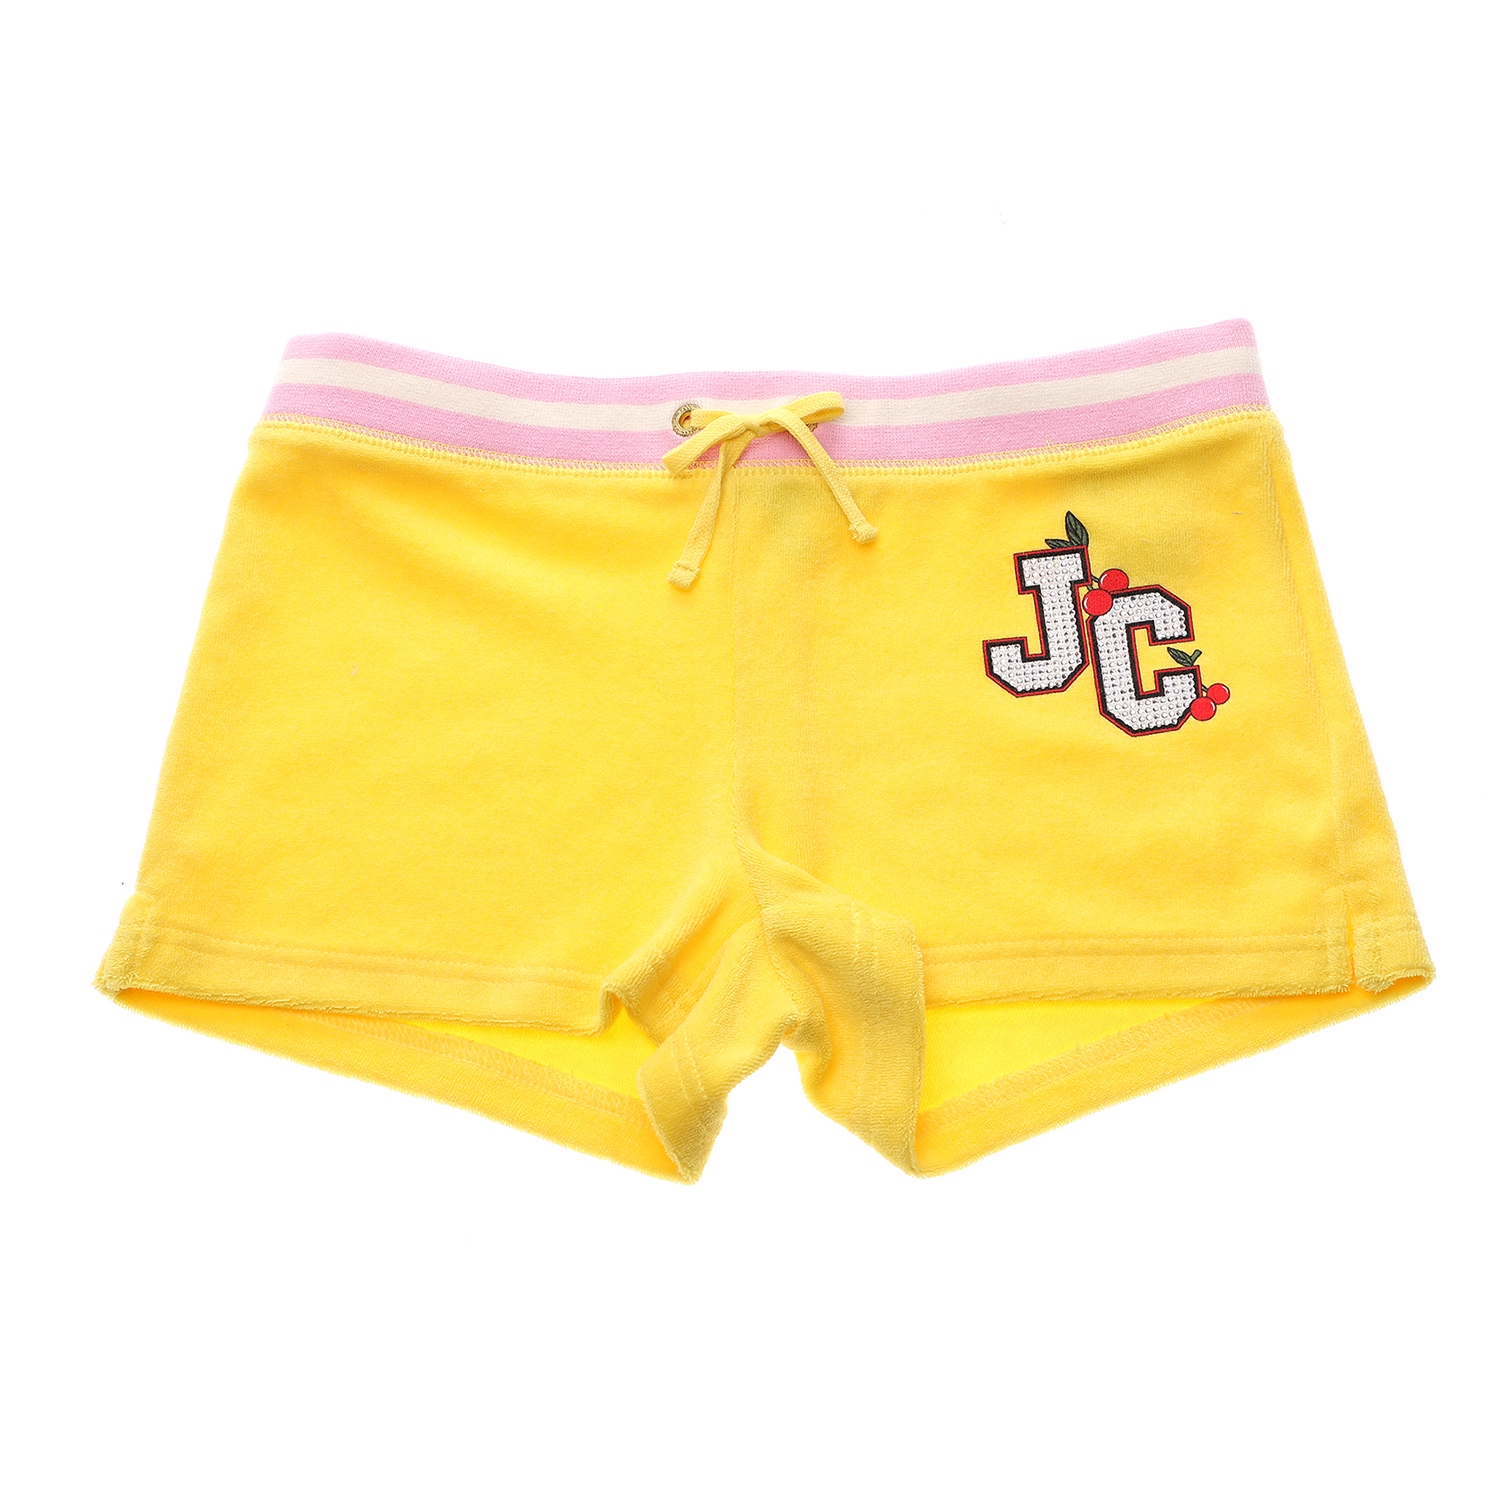 JUICY COUTURE KIDS Παιδικό σορτς για κορίτσια JUICY COUTURE KIDS CHERRY GROVE MICROTERRY κίτρινο